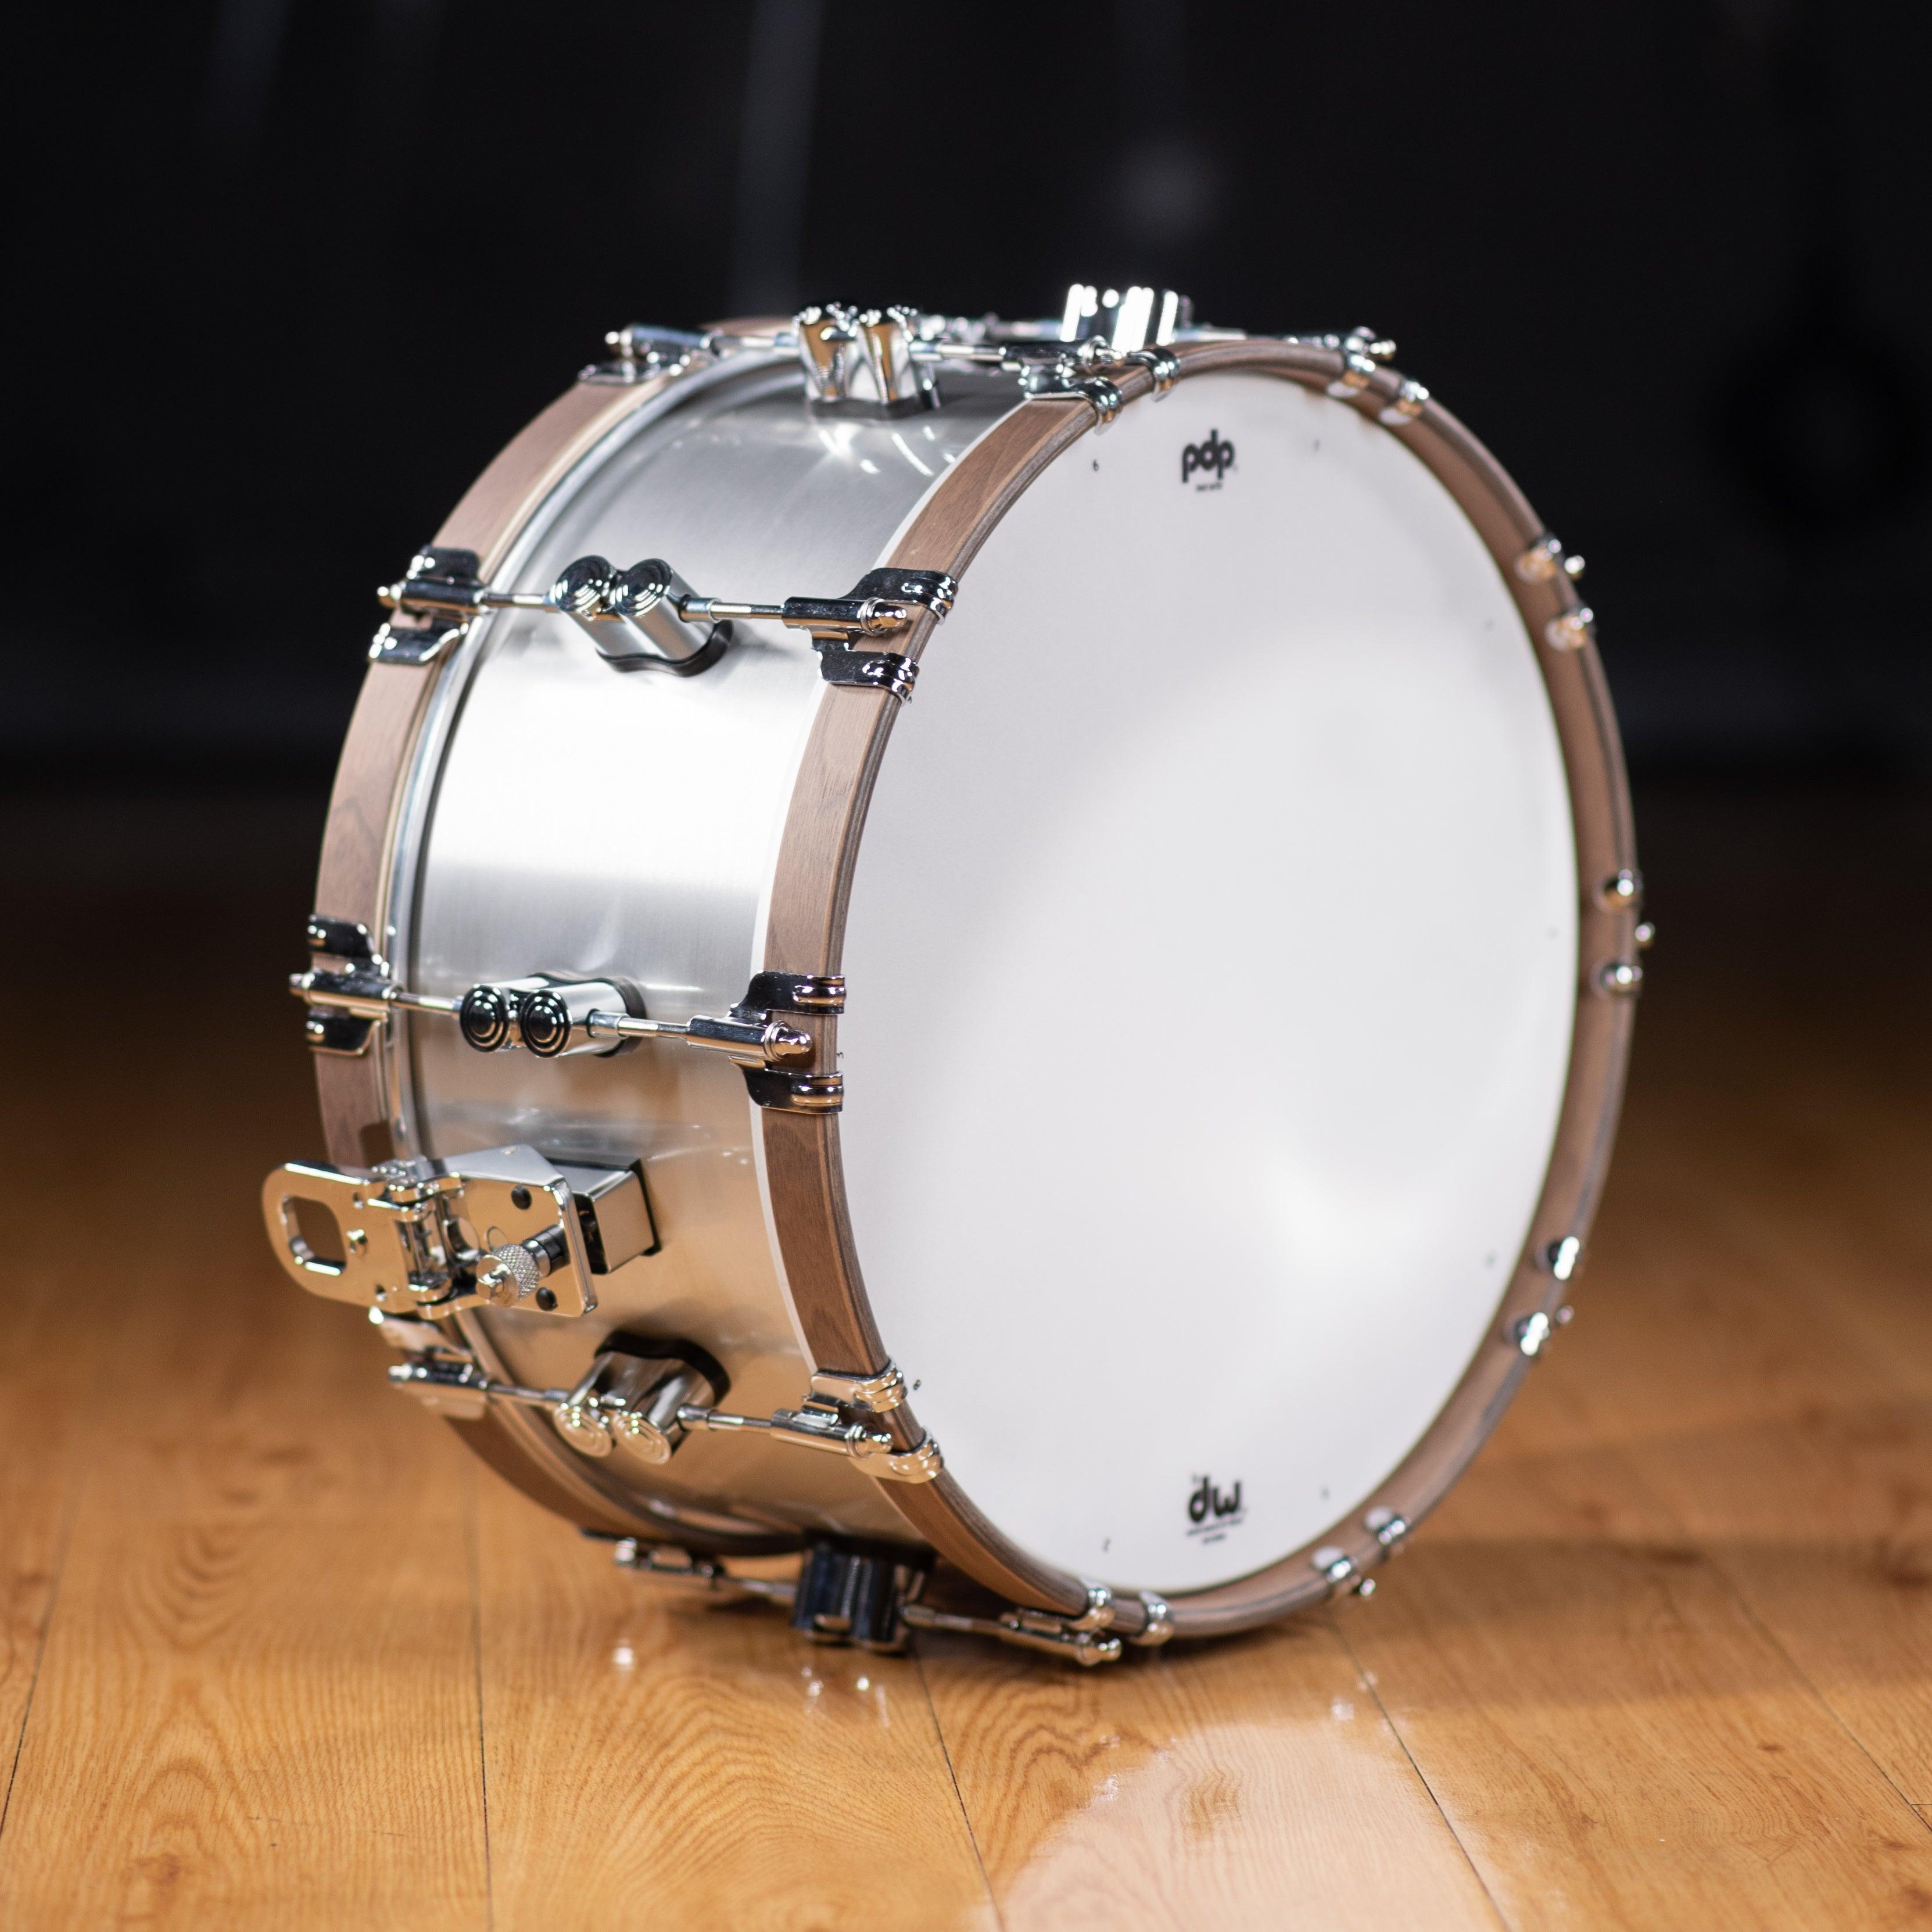 PDP Concept Select Snare Drum - Impulse Music Co.